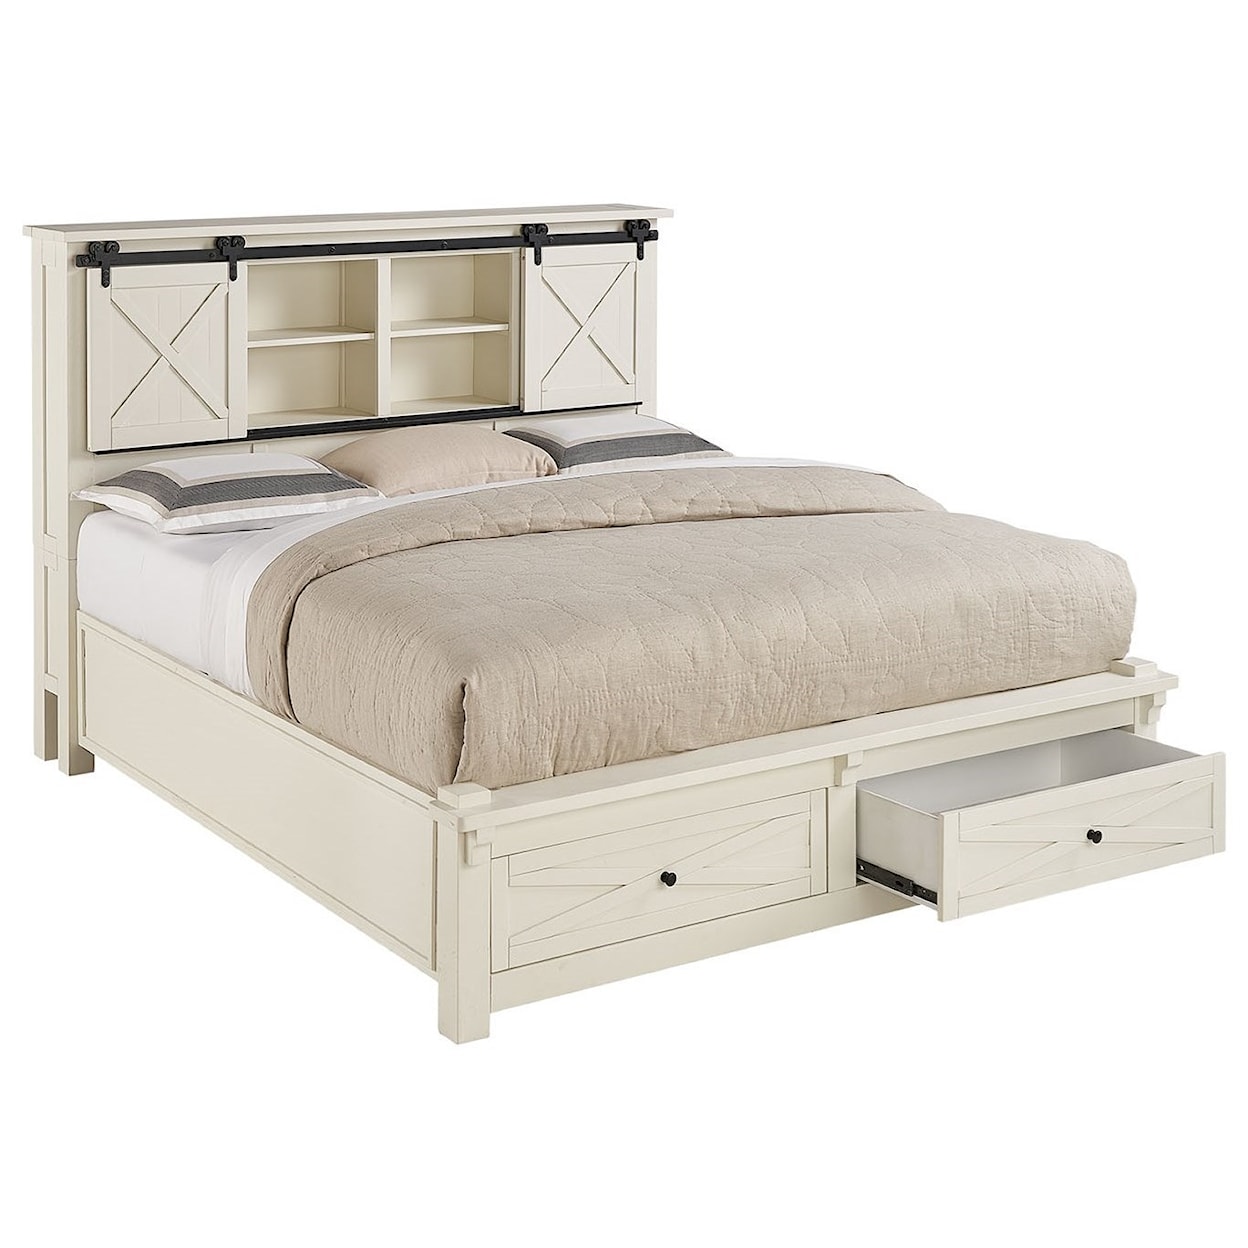 A-A Sun Valley King Bookcase Bed